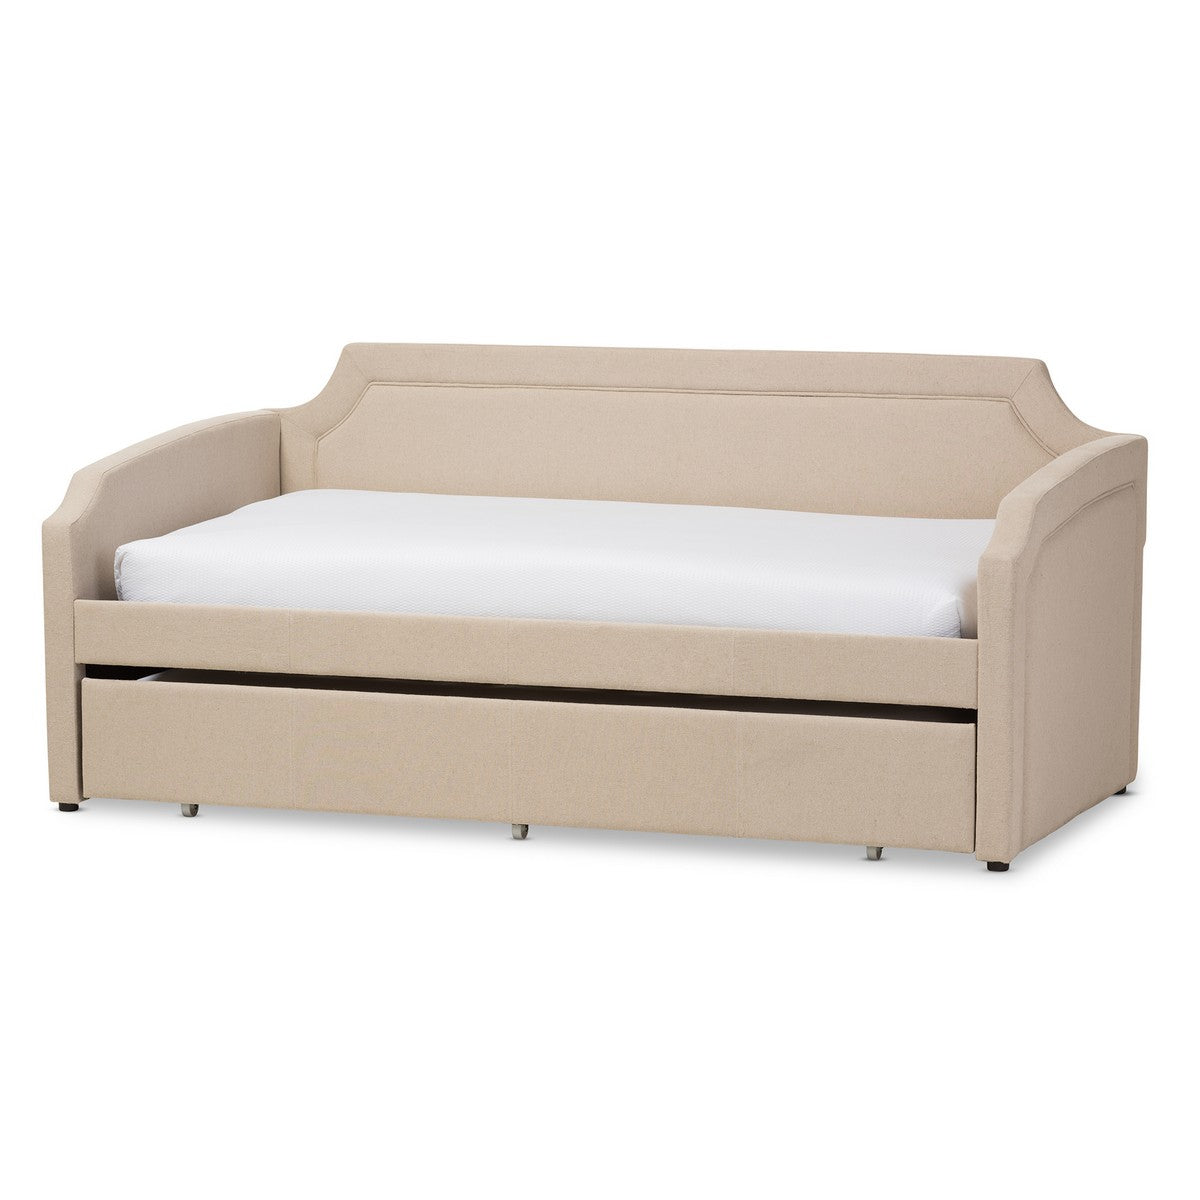 Baxton Studio Parkson Modern and Contemporary Beige Linen Fabric Curved Notched Corners Sofa Twin Daybed with Roll-Out Trundle Guest Bed Baxton Studio-daybed-Minimal And Modern - 1